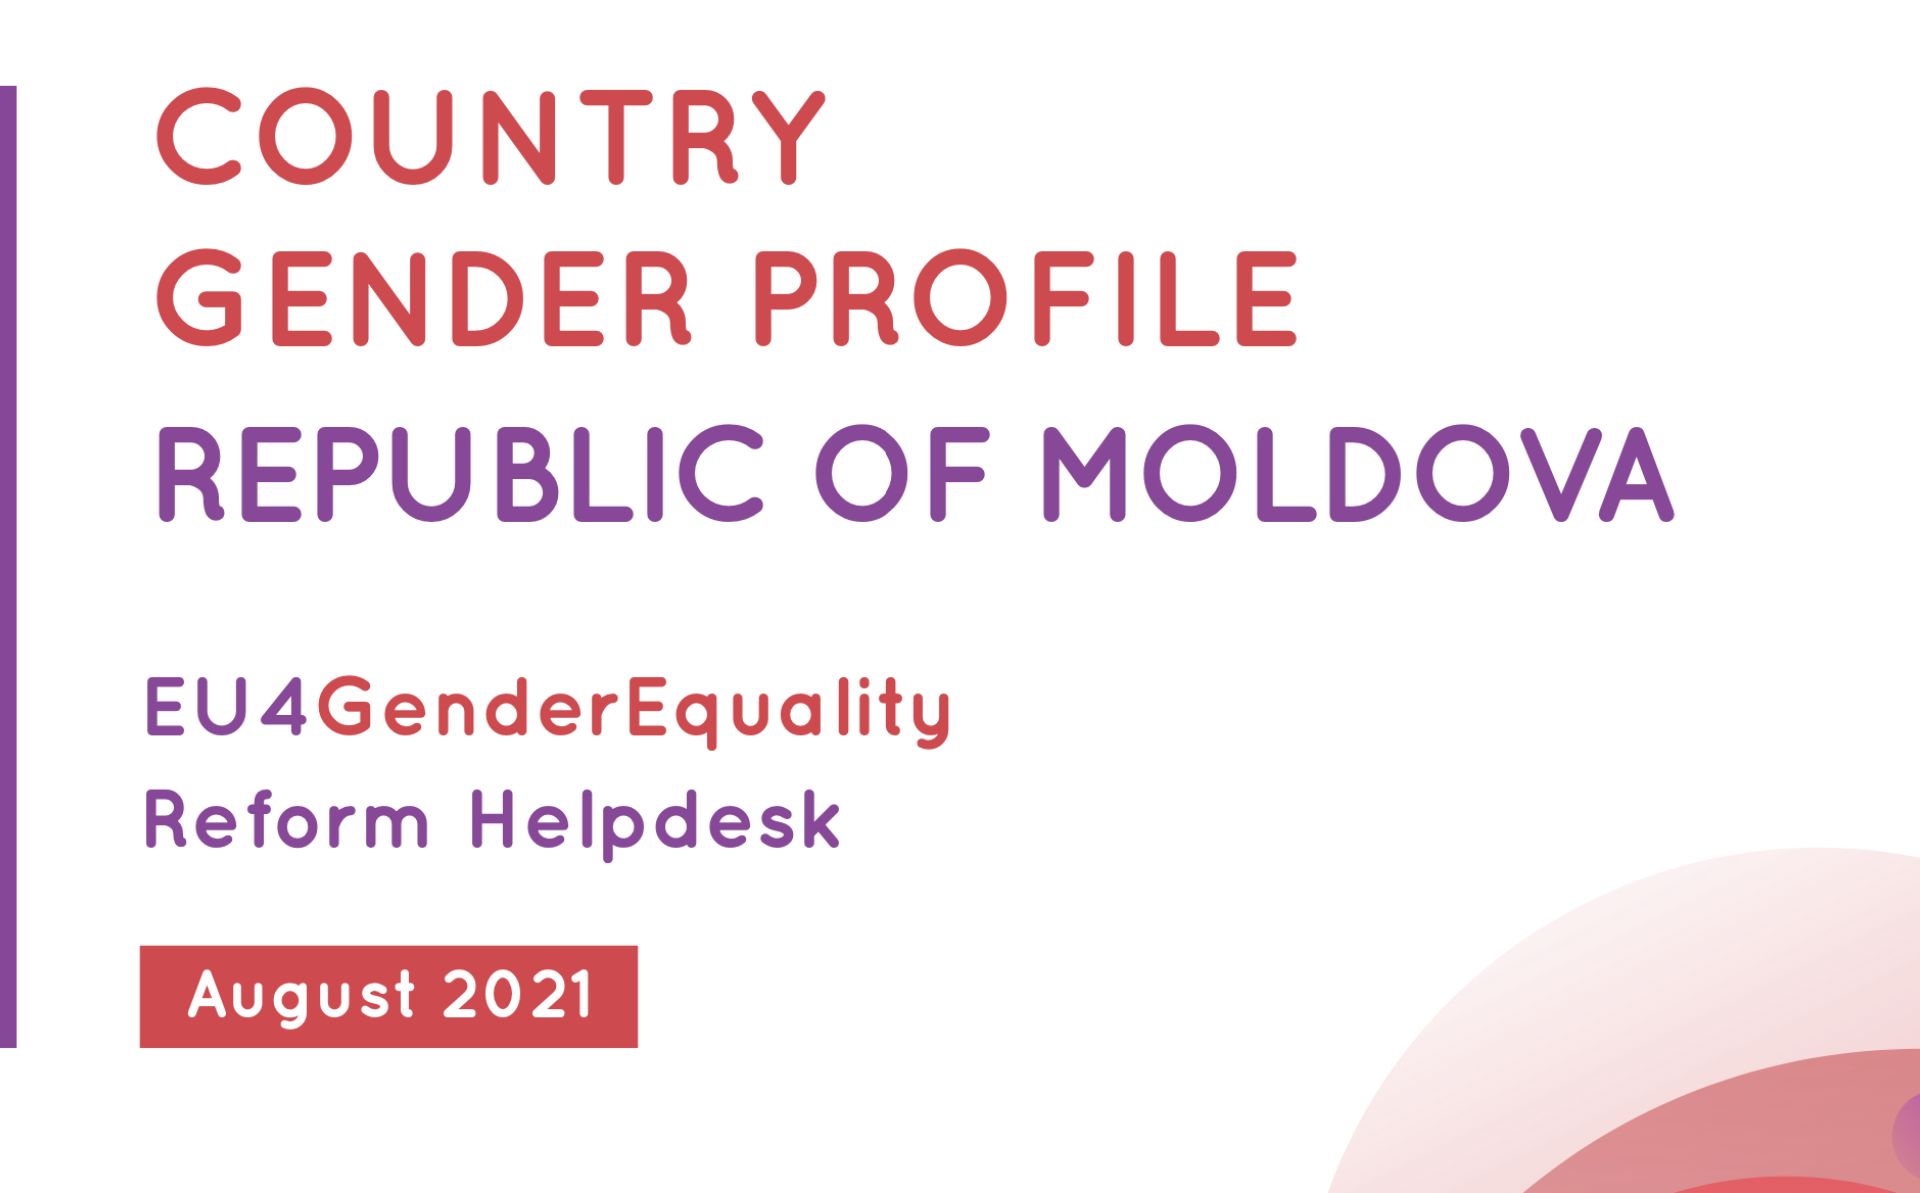 Country Gender Profile of the Republic of Moldova